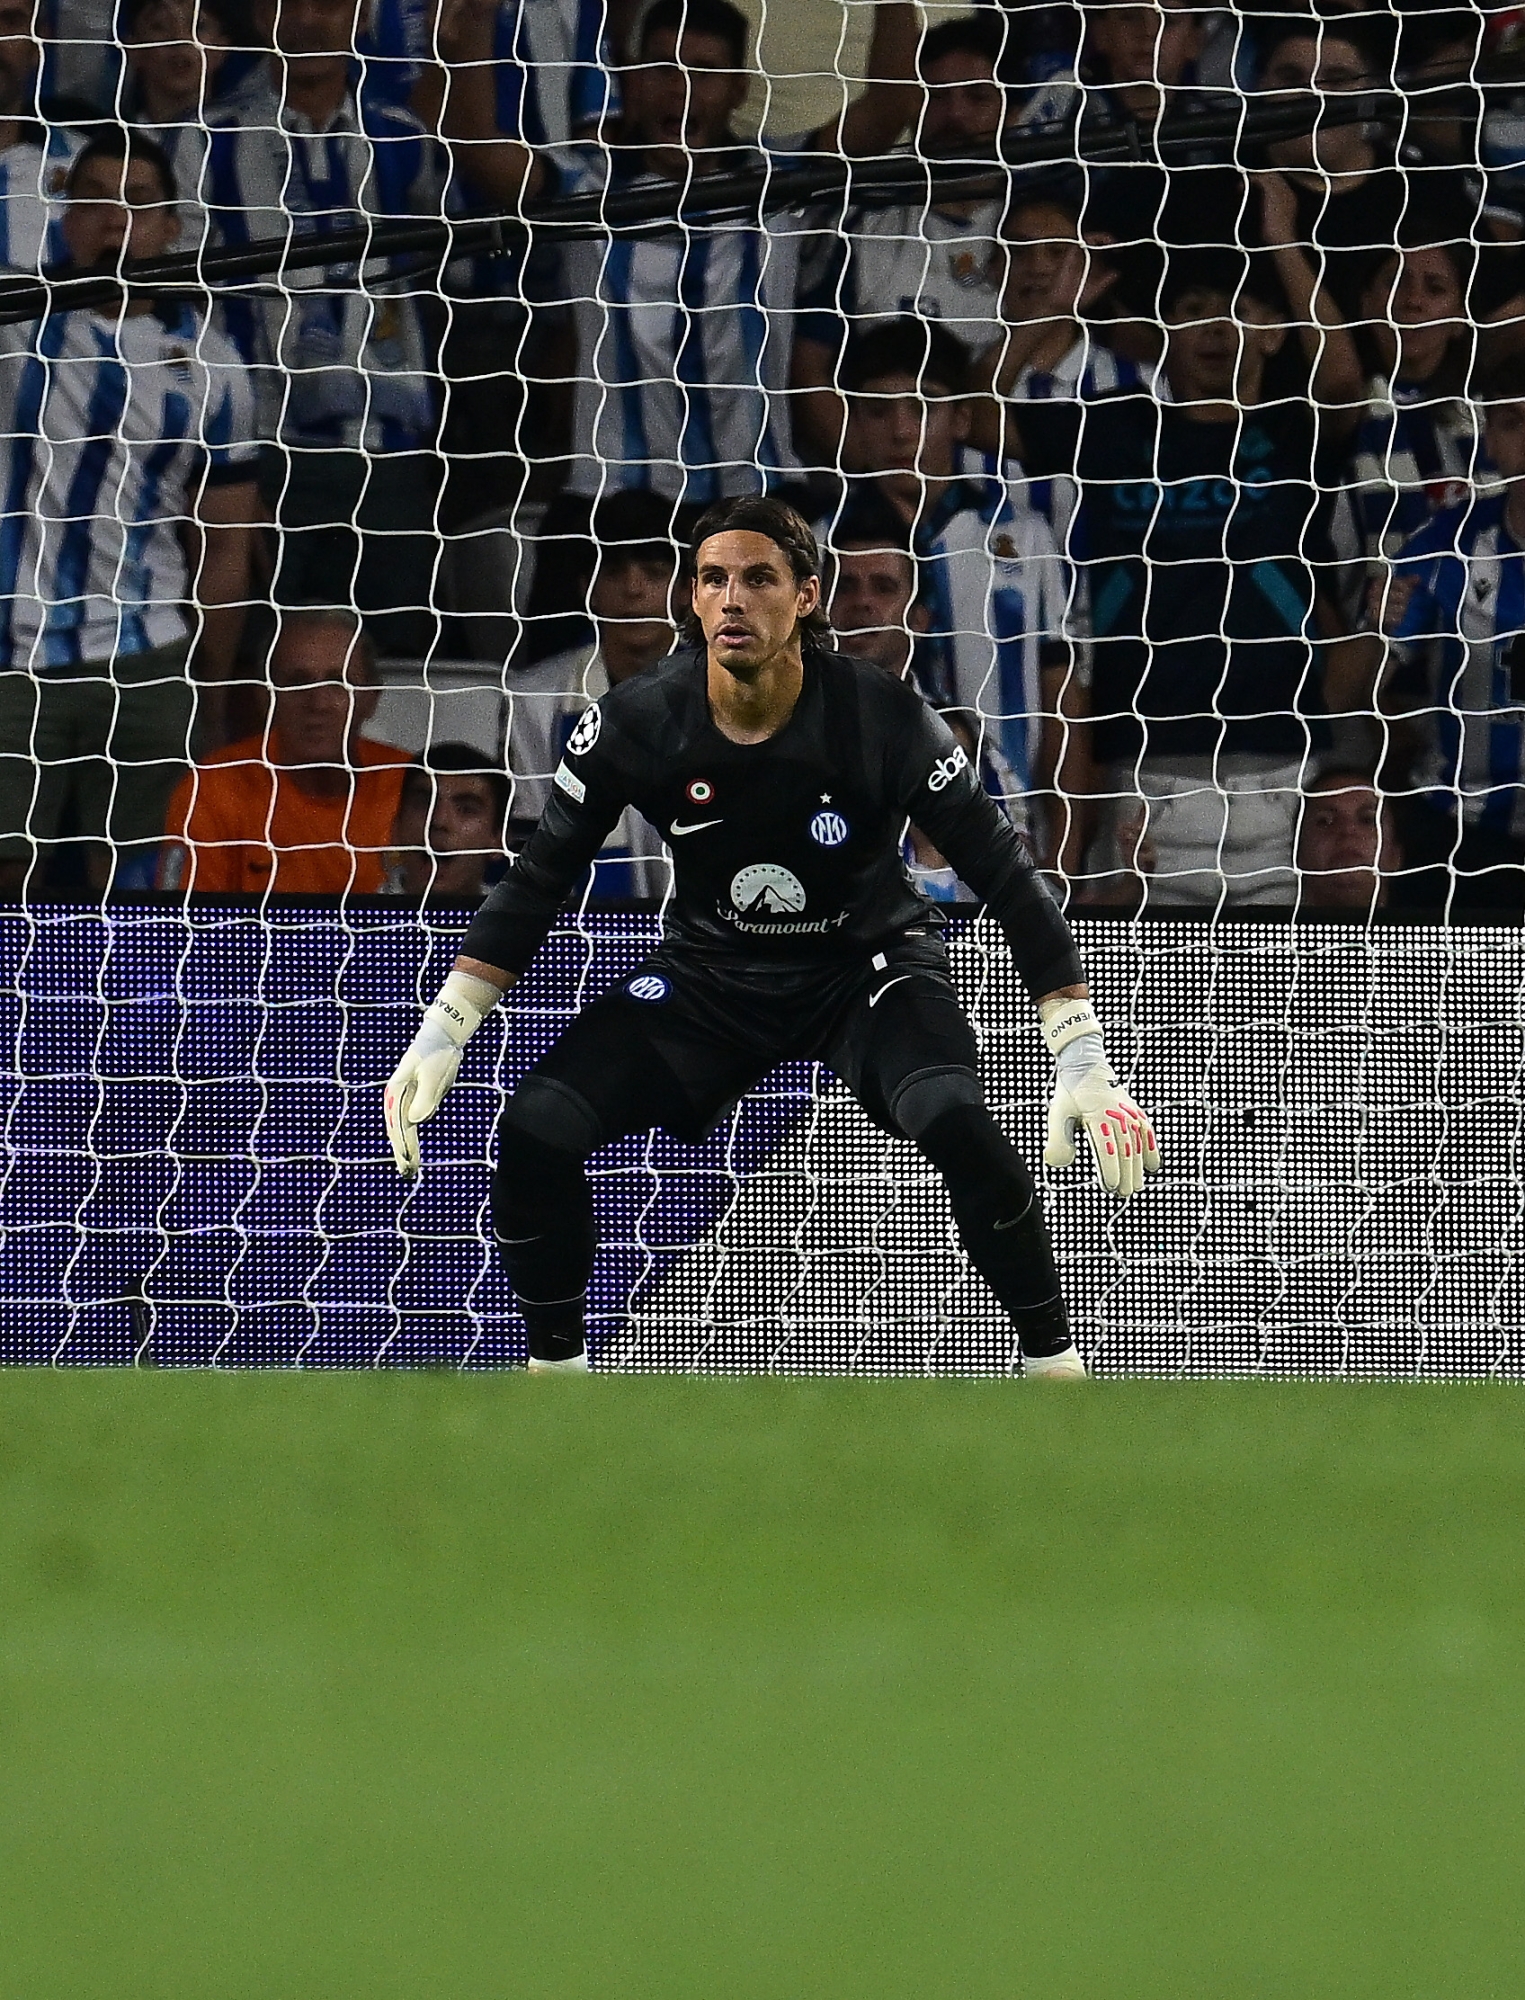 SAN SEBASTIAN, SPAIN - SEPTEMBER 20:  Yanno Sommer of FC Internazionale in action during the UEFA Champions League match between Real Sociedad and FC Internazionale  at Reale Arena on September 20, 2023 in San Sebastian, Spain. (Photo by Mattia Ozbot - Inter/Inter via Getty Images)